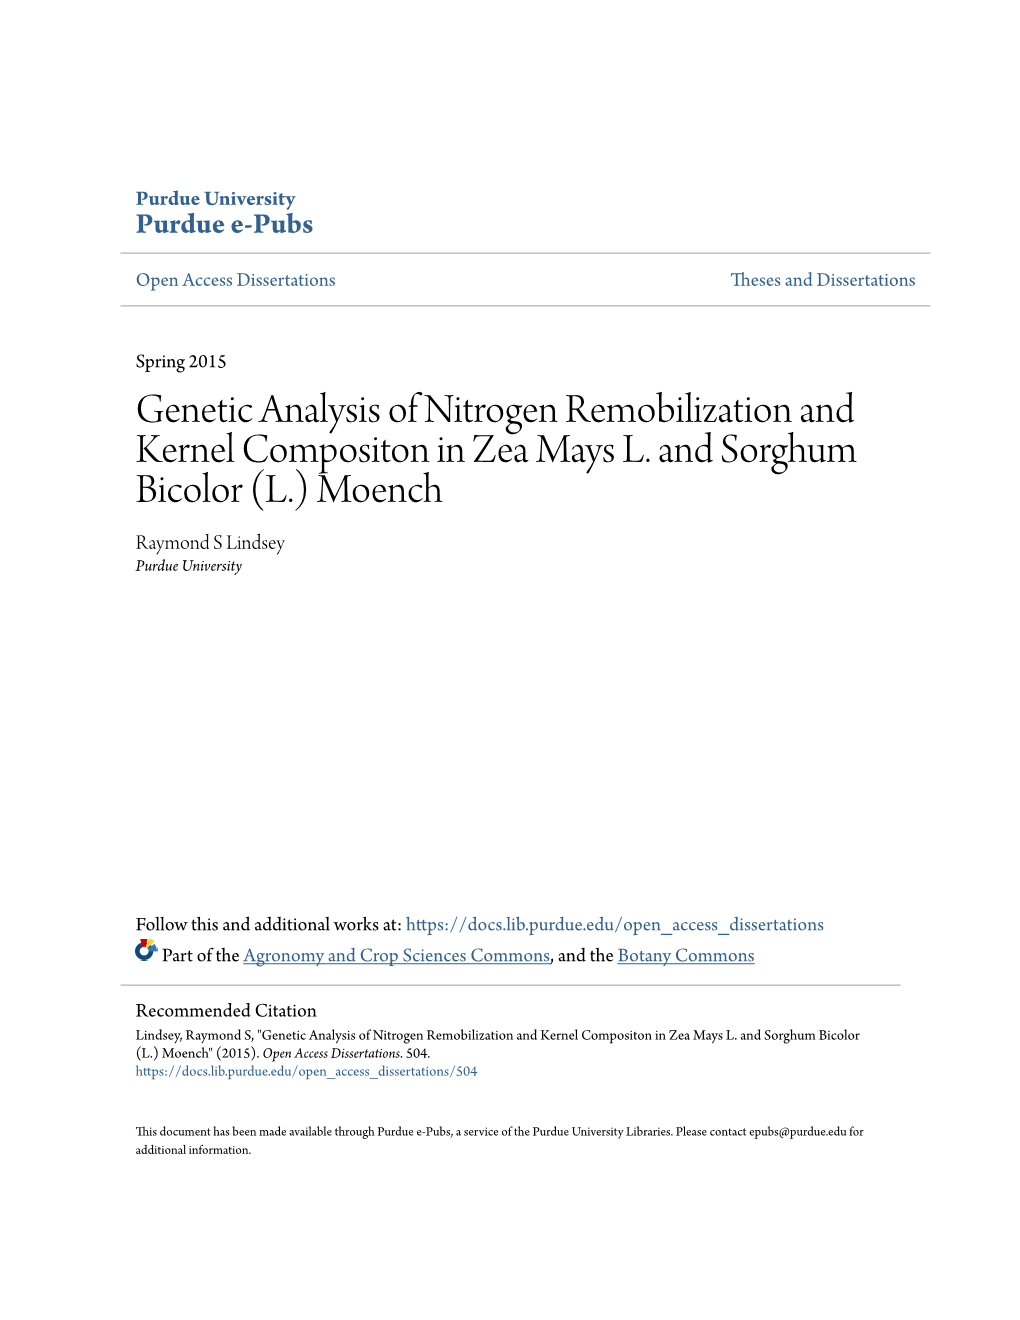 Genetic Analysis of Nitrogen Remobilization and Kernel Compositon in Zea Mays L